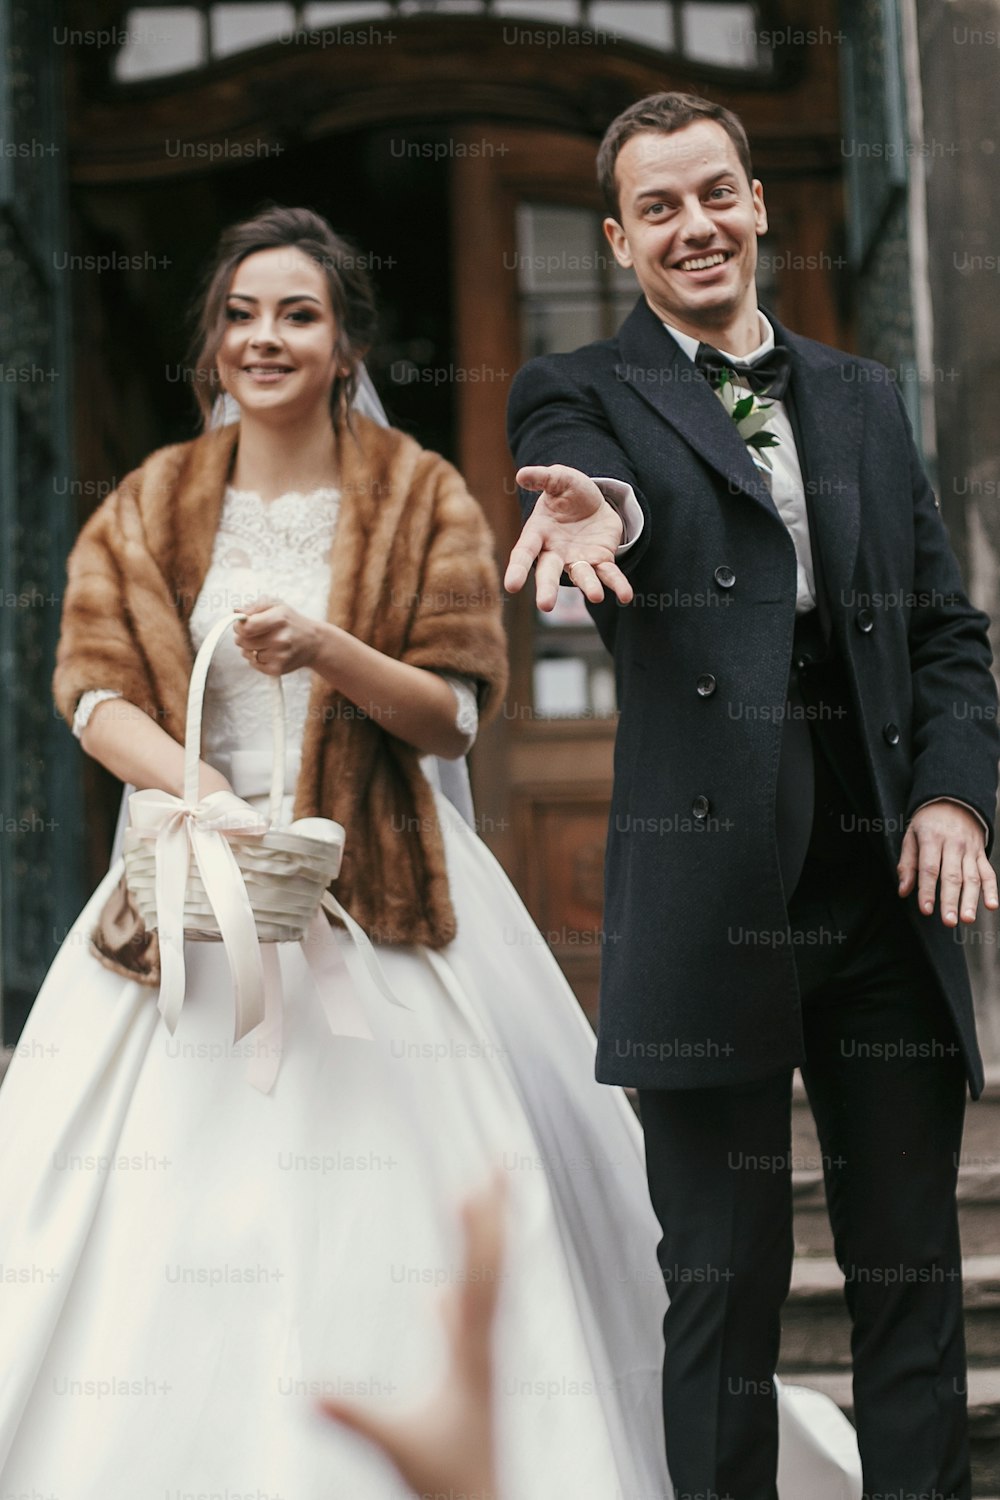 gorgeous bride in coat and stylish groom throwing candy near church door after wedding ceremony.  happy newlywed couple smiling and having fun. romantic 
 moment